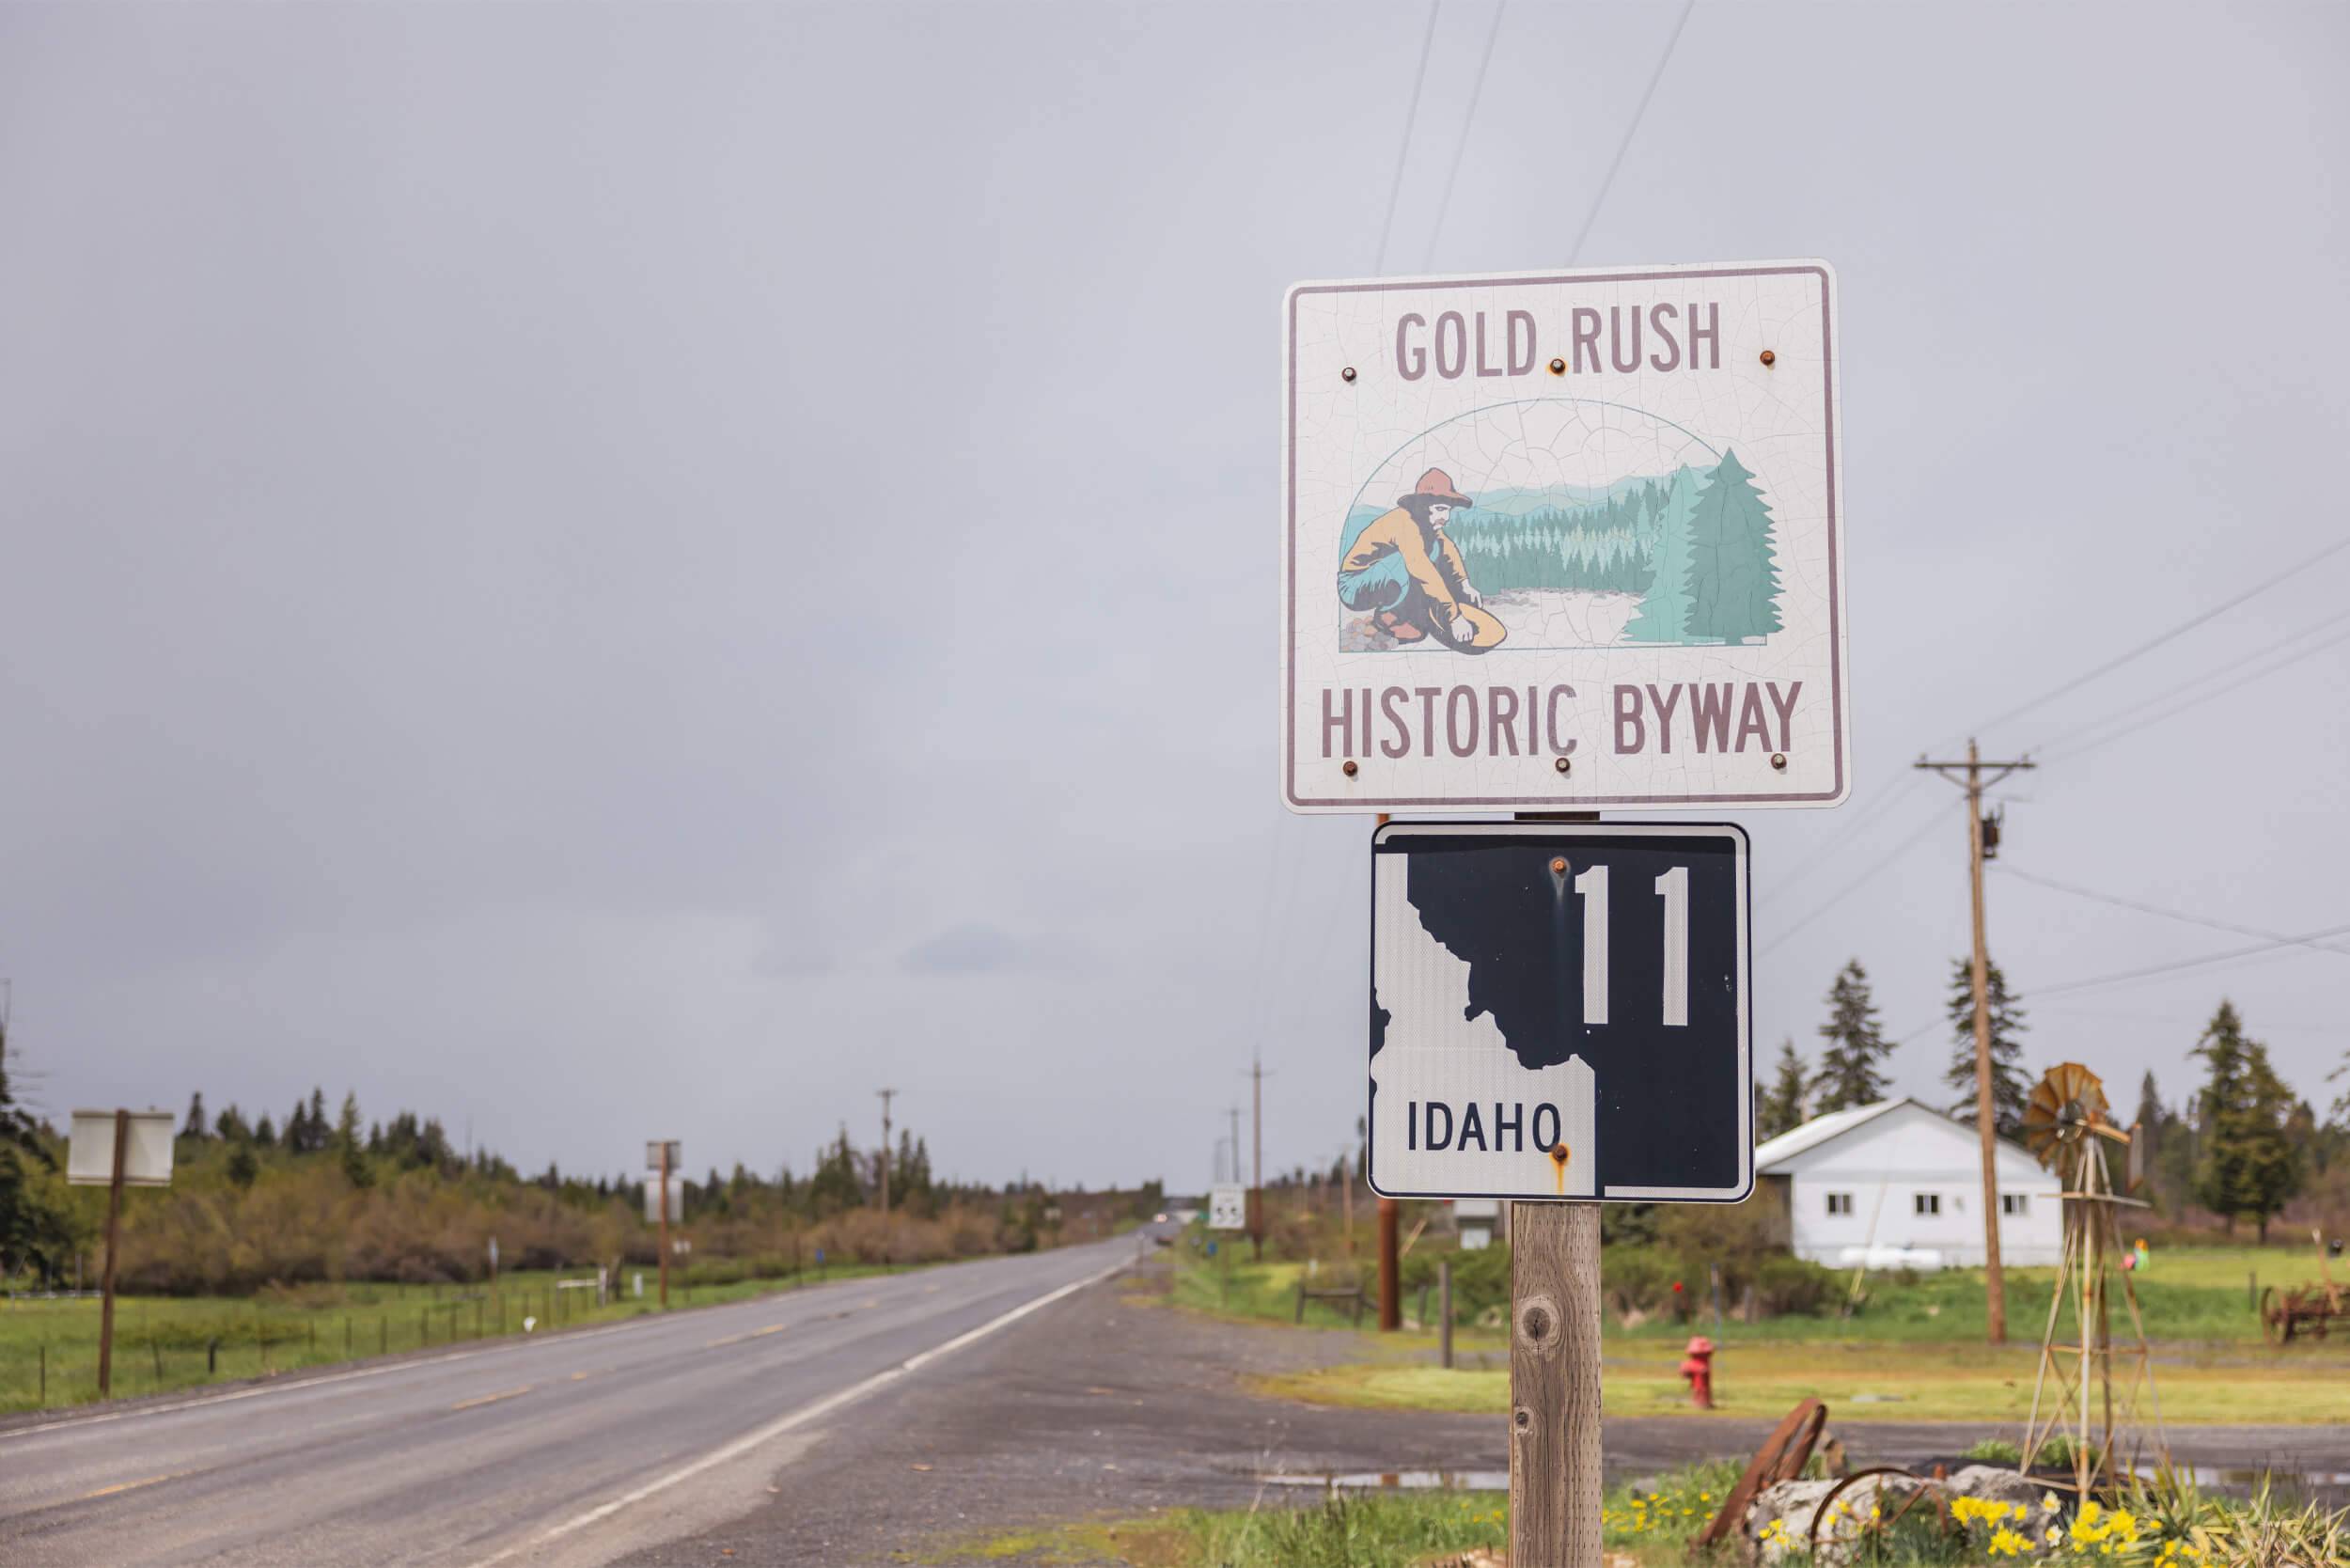 A roadside sign for Gold Rush Historic Byway.